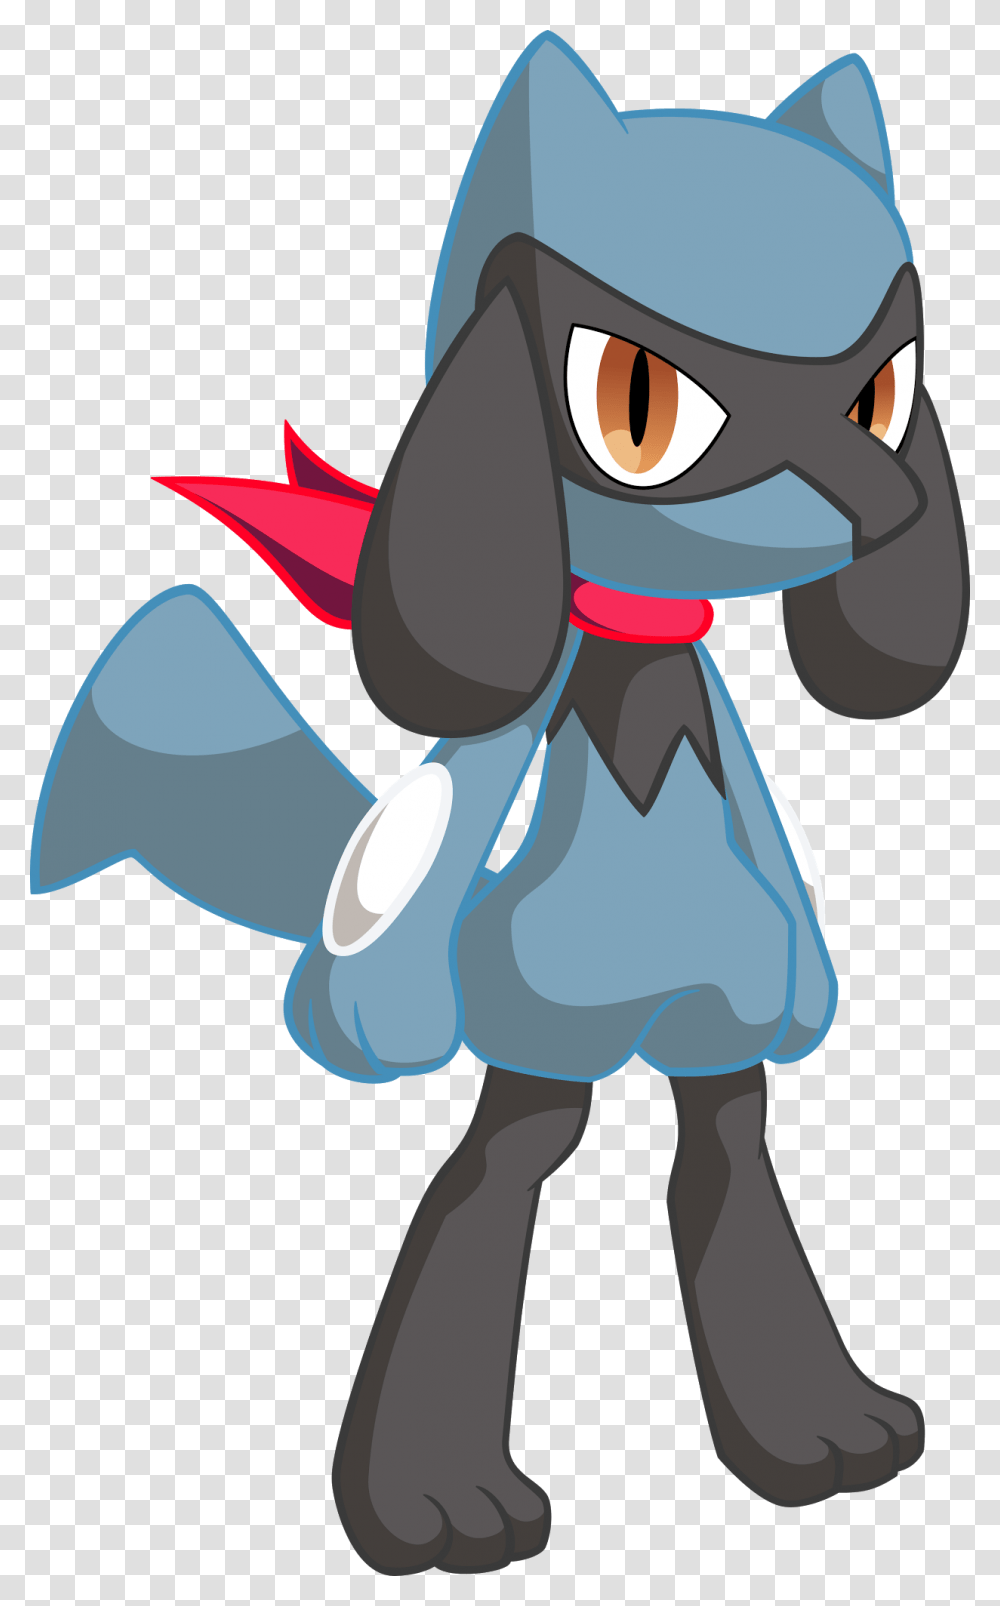 Riolu Pokemon Mystery Dungeon Clipart Pokemon Mystery Dungeon Explorers Of Sky Riolu, Angry Birds, Animal, Drawing Transparent Png